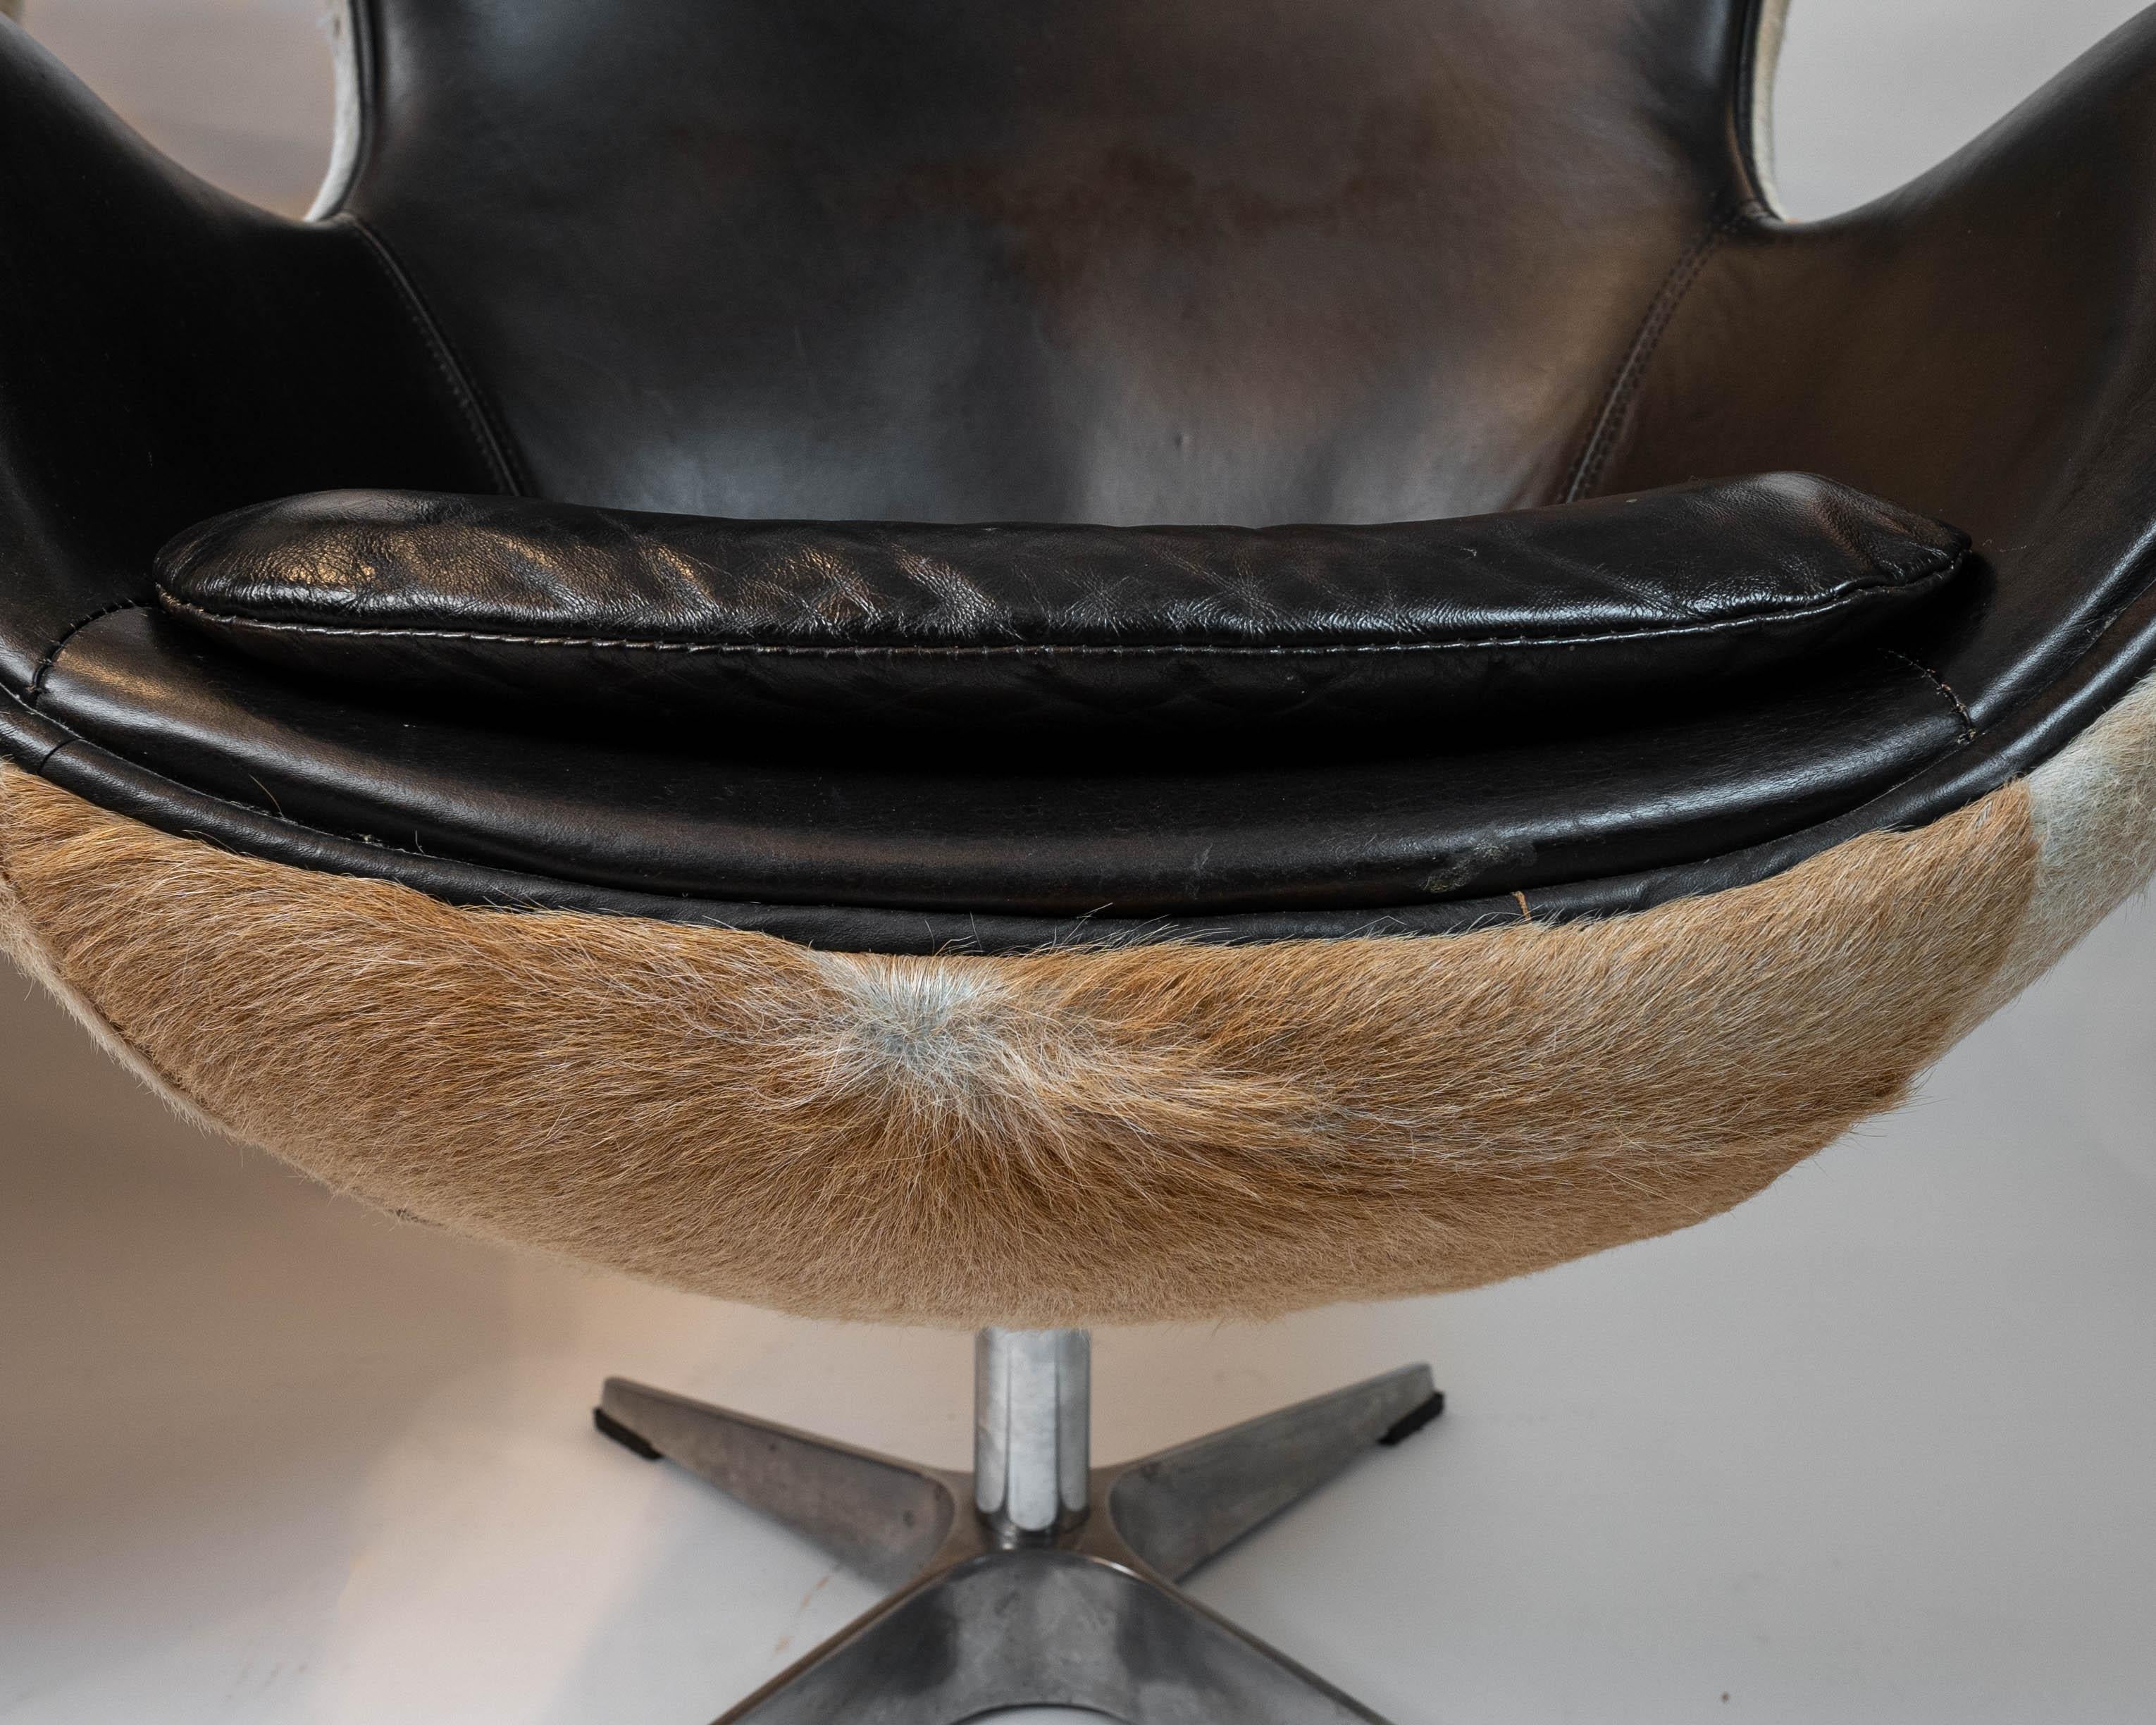 Sensational Pair of Hair on Hide & Leather Arne Jacobsen Inspired Egg Chairs In Good Condition For Sale In Hopewell, NJ